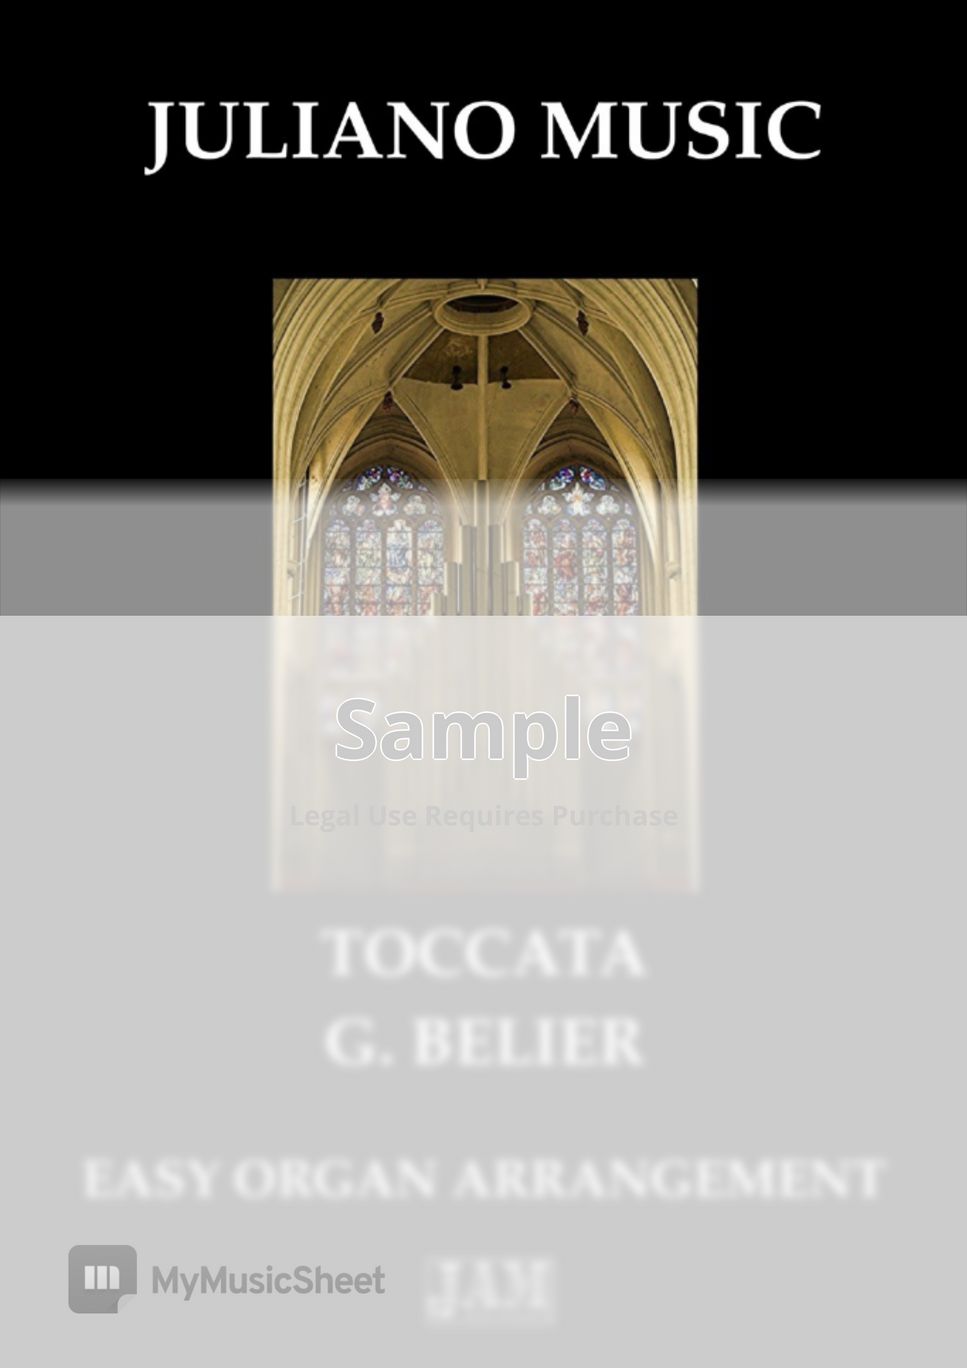 G. BELIER - TOCCATA by Juliano Music